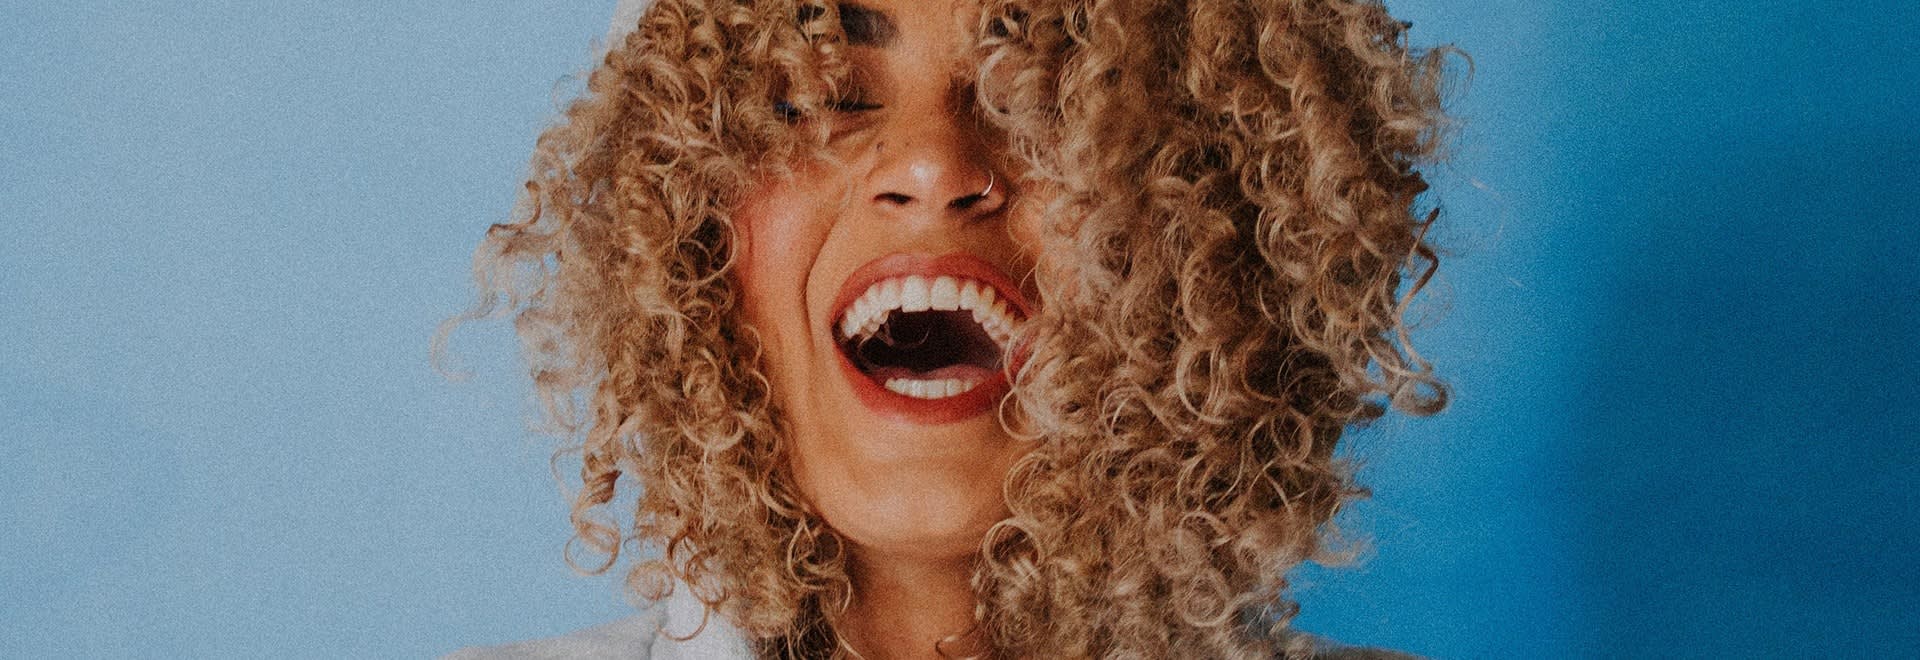 A portrait photo of a woman with blonde curly hair laughing to the camera